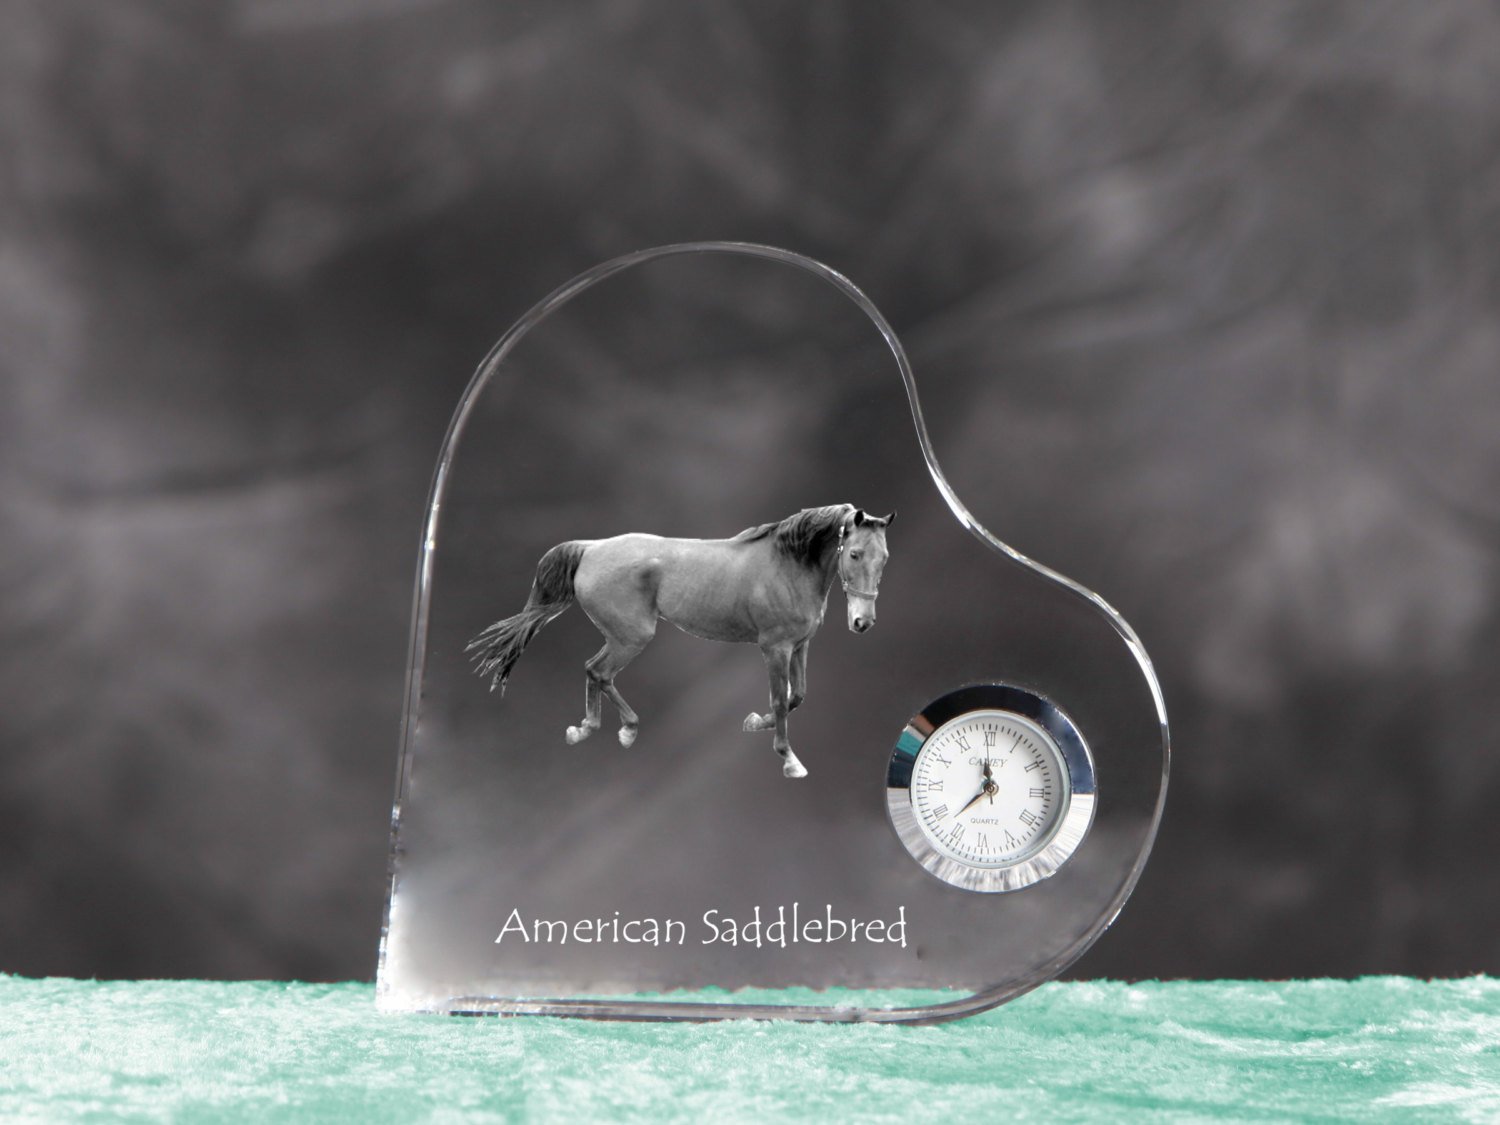 Primary image for American Saddlebred - crystal clock in the shape of a heart with a horse